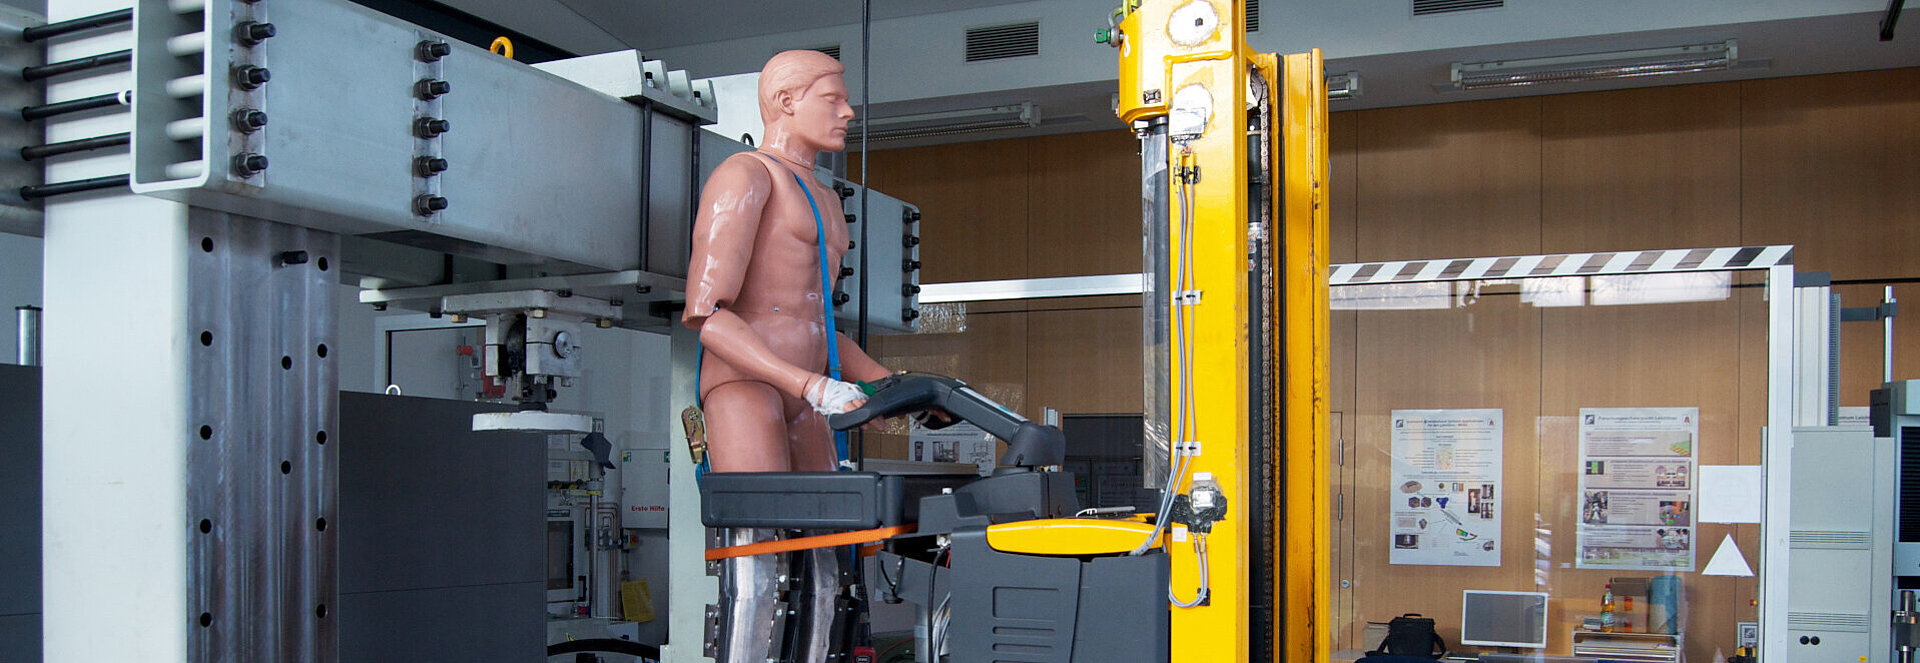 Dummy elevated by a forklift.